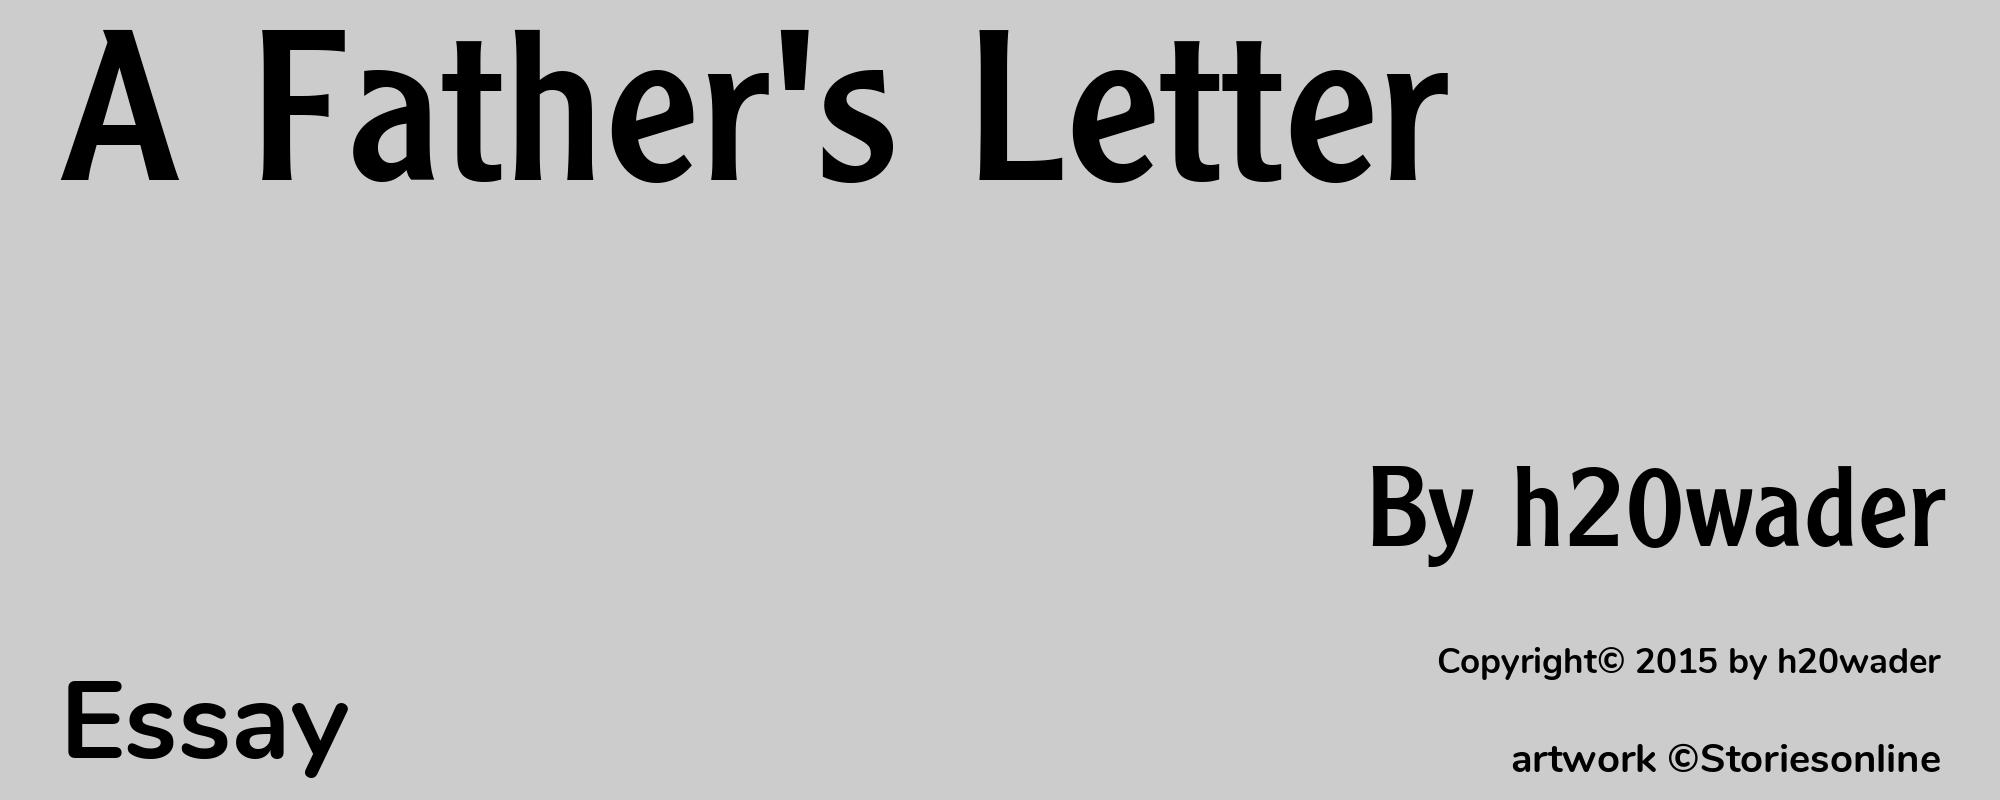 A Father's Letter - Cover